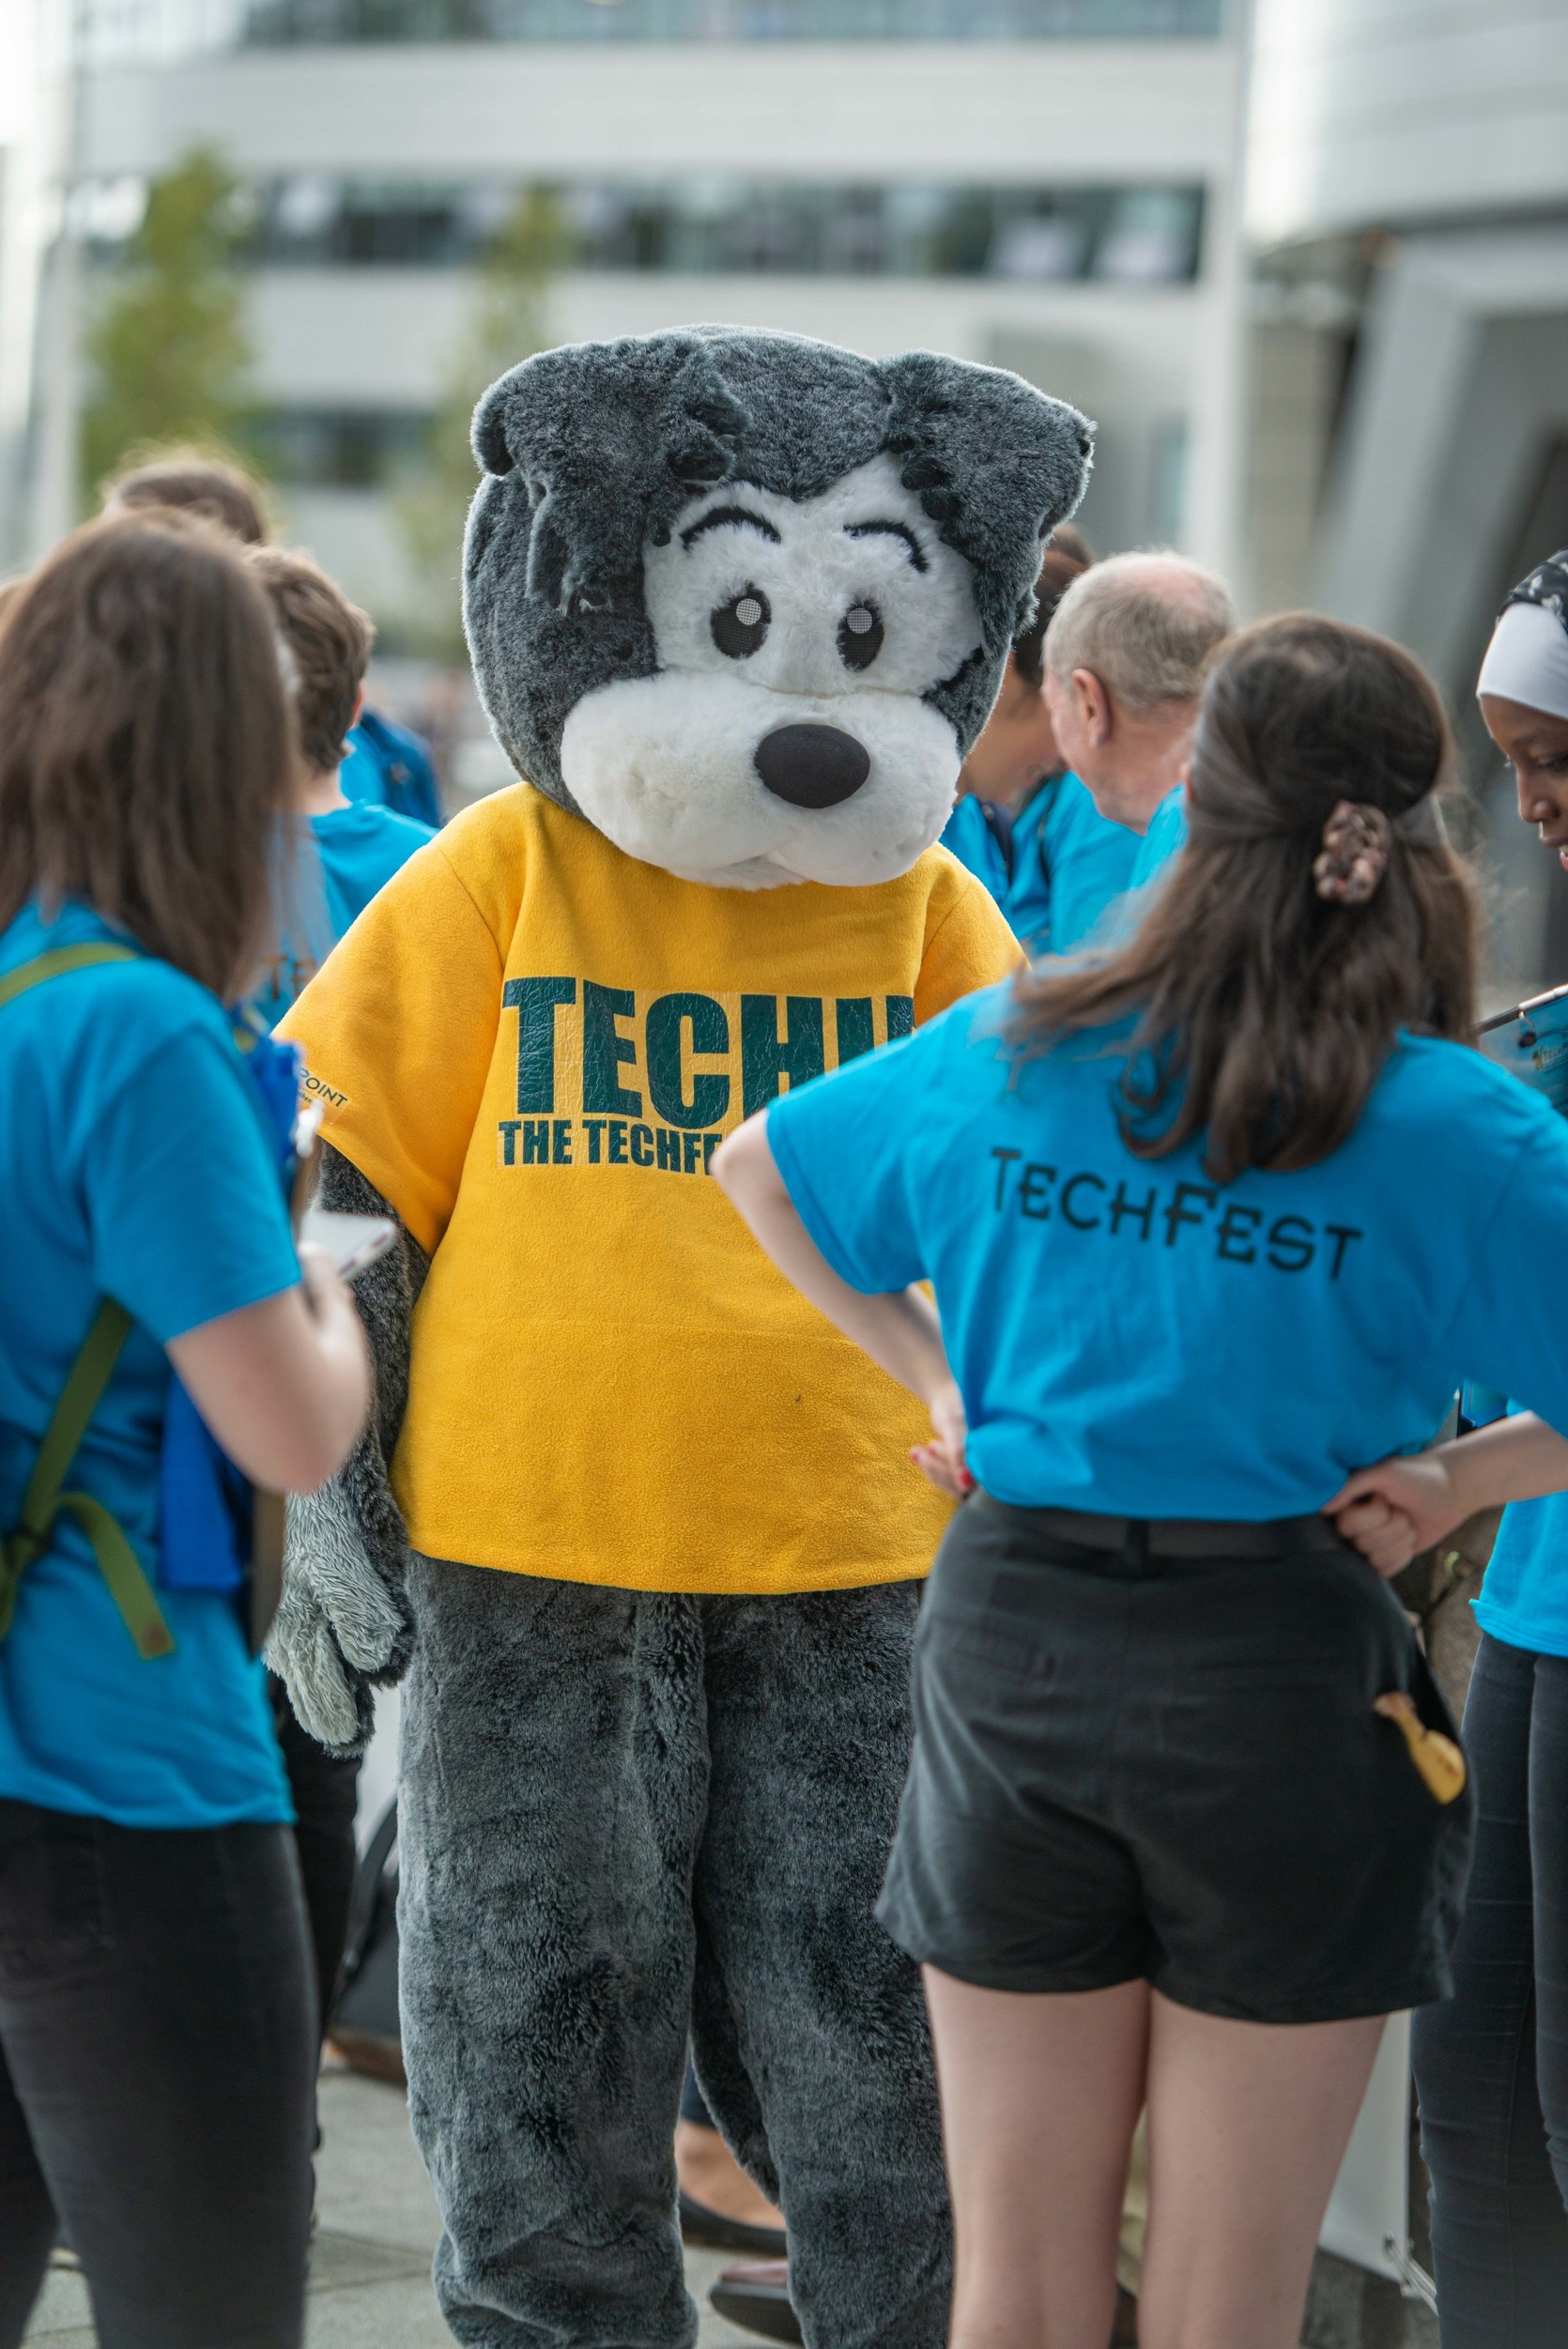 Robert Gordon University, Aberdeen,Tuedsay 27th August 2019 Pictured is School visits to TechFest 2019Picture by Euan Duff / Abermedia